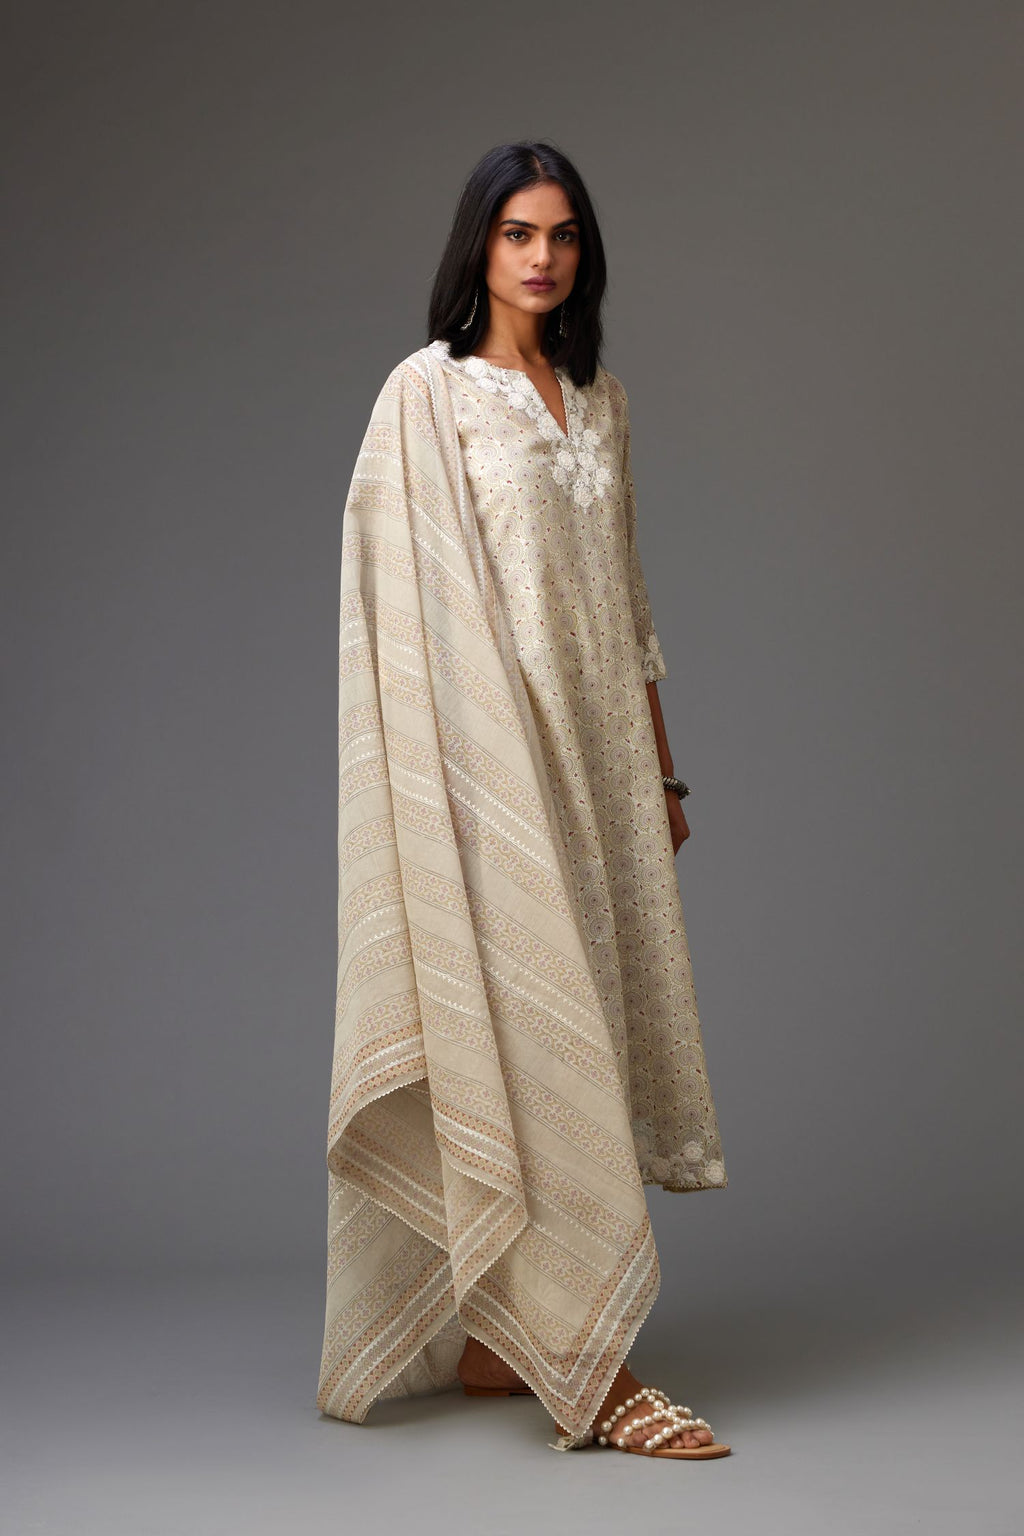 Beige & grey hand block printed Cotton Chanderi dupatta, with embroidery and ric-rac lace.